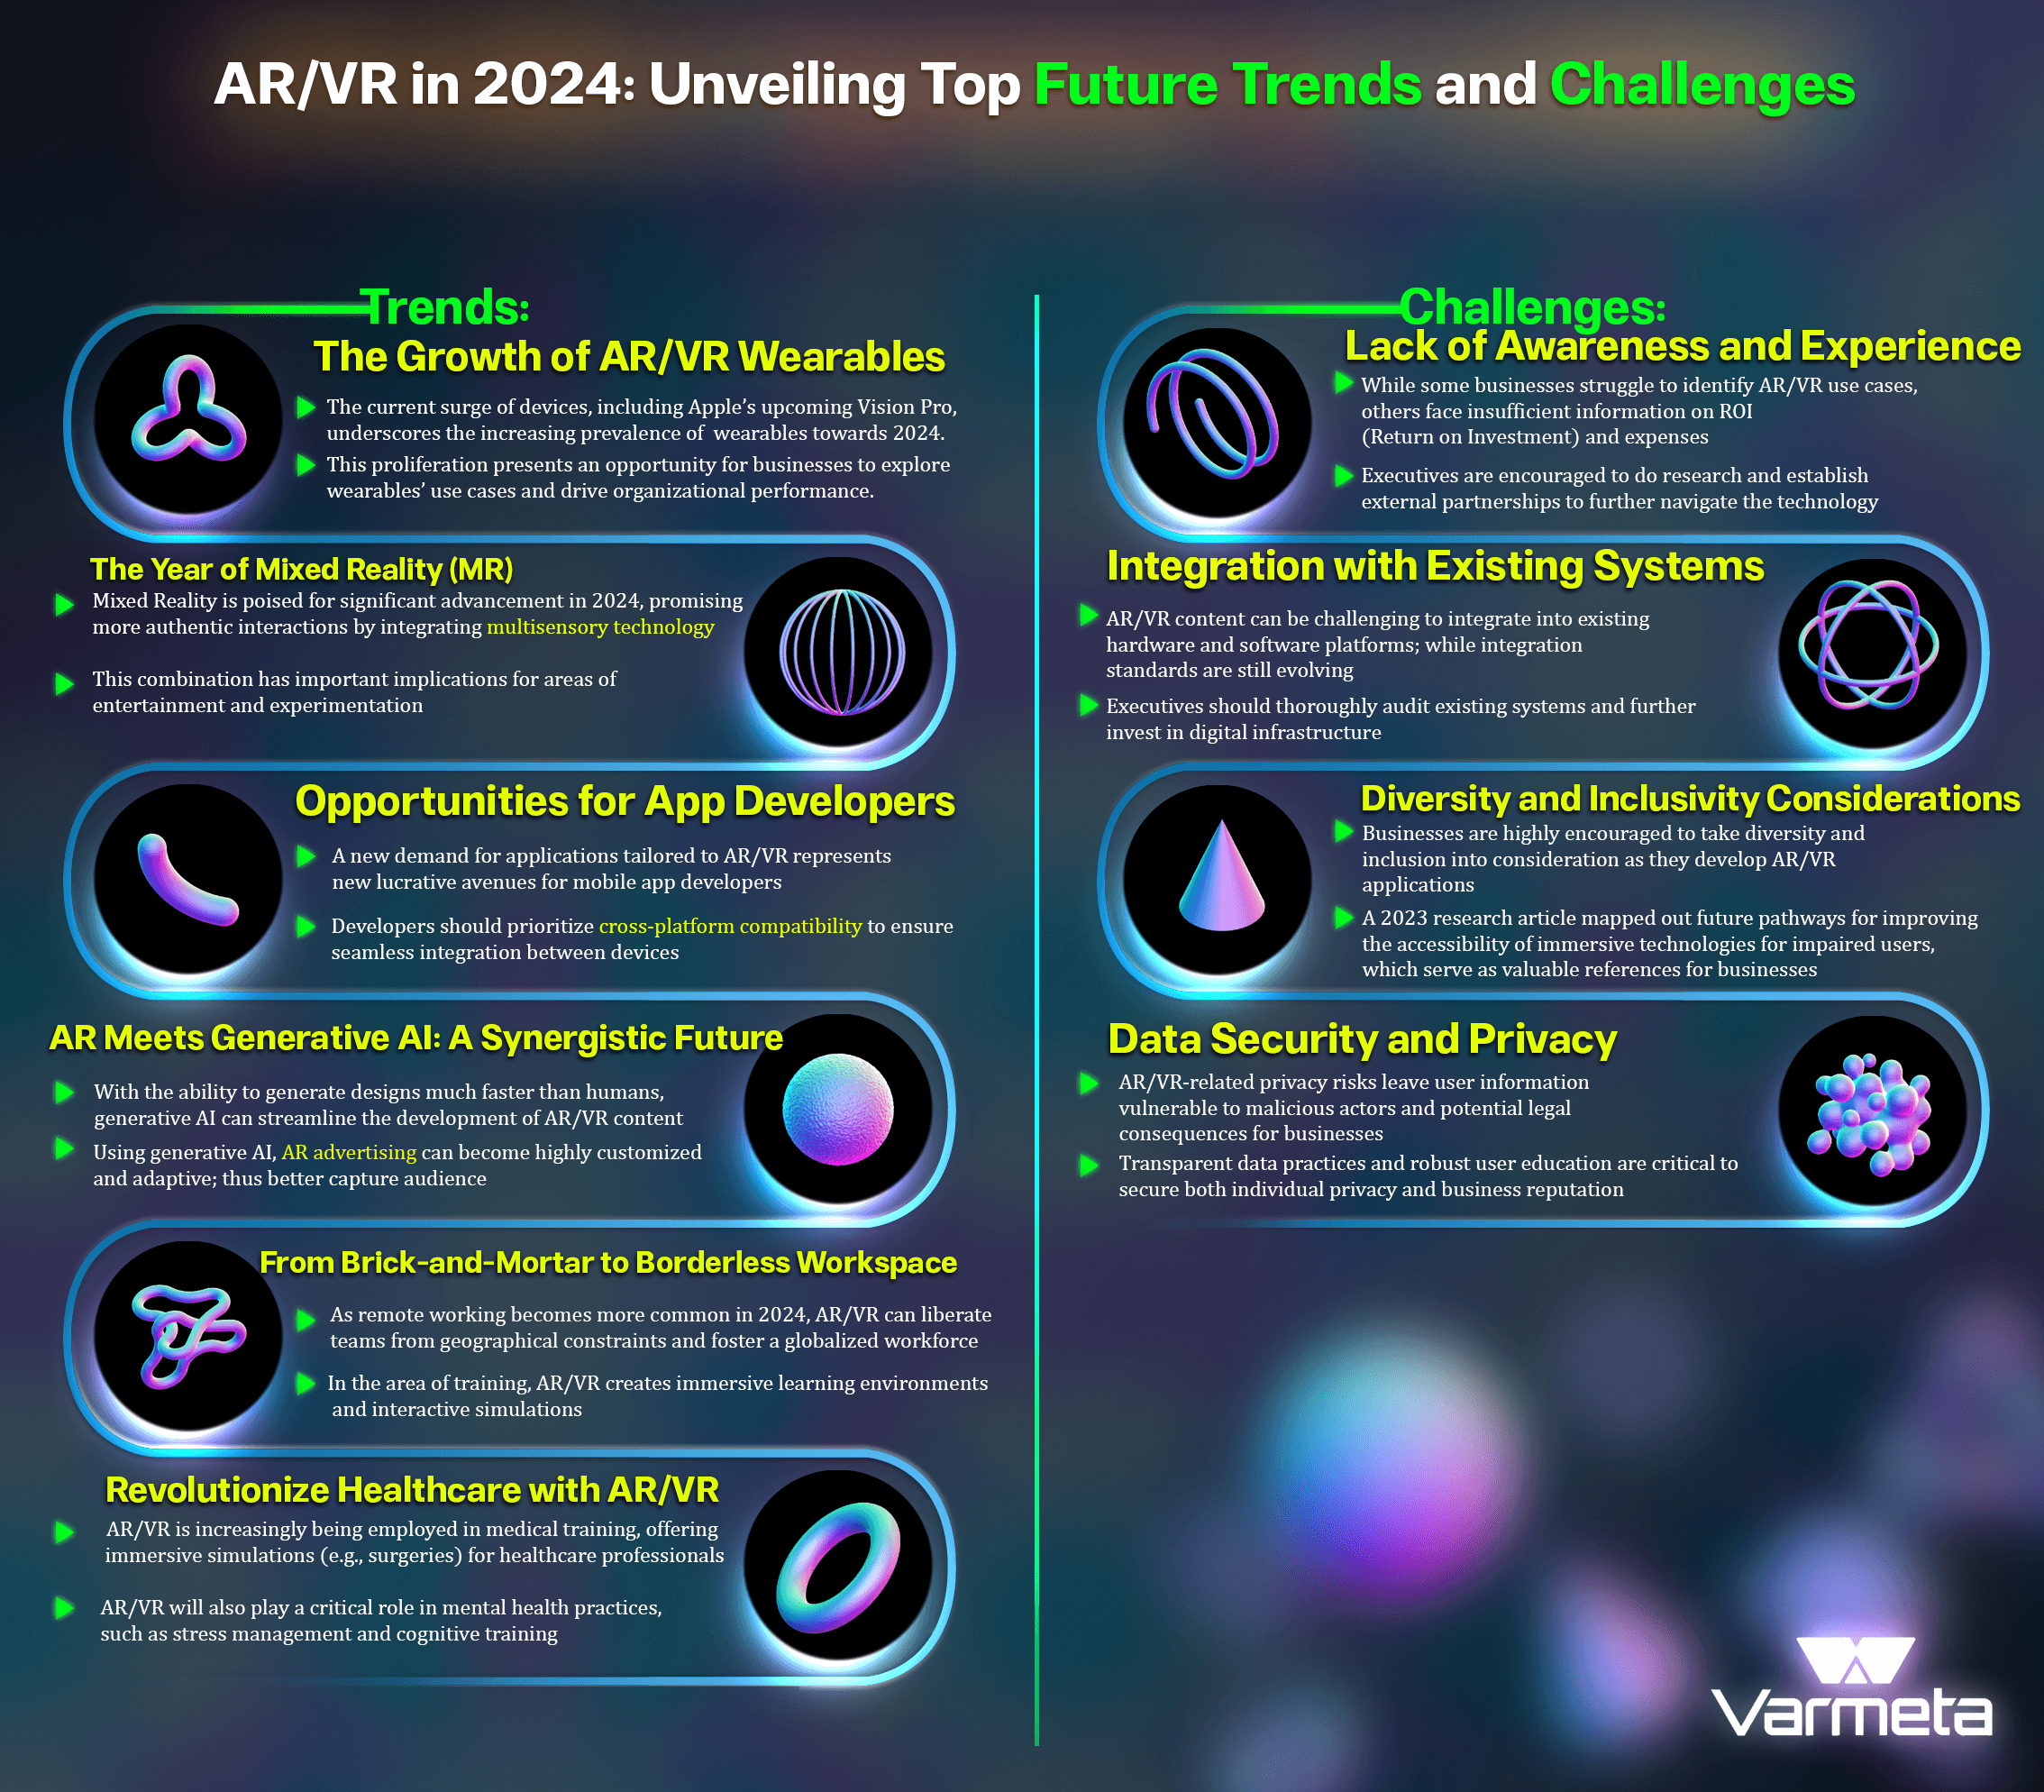 AR/VR Trends and Challenges in 2024: Infographic